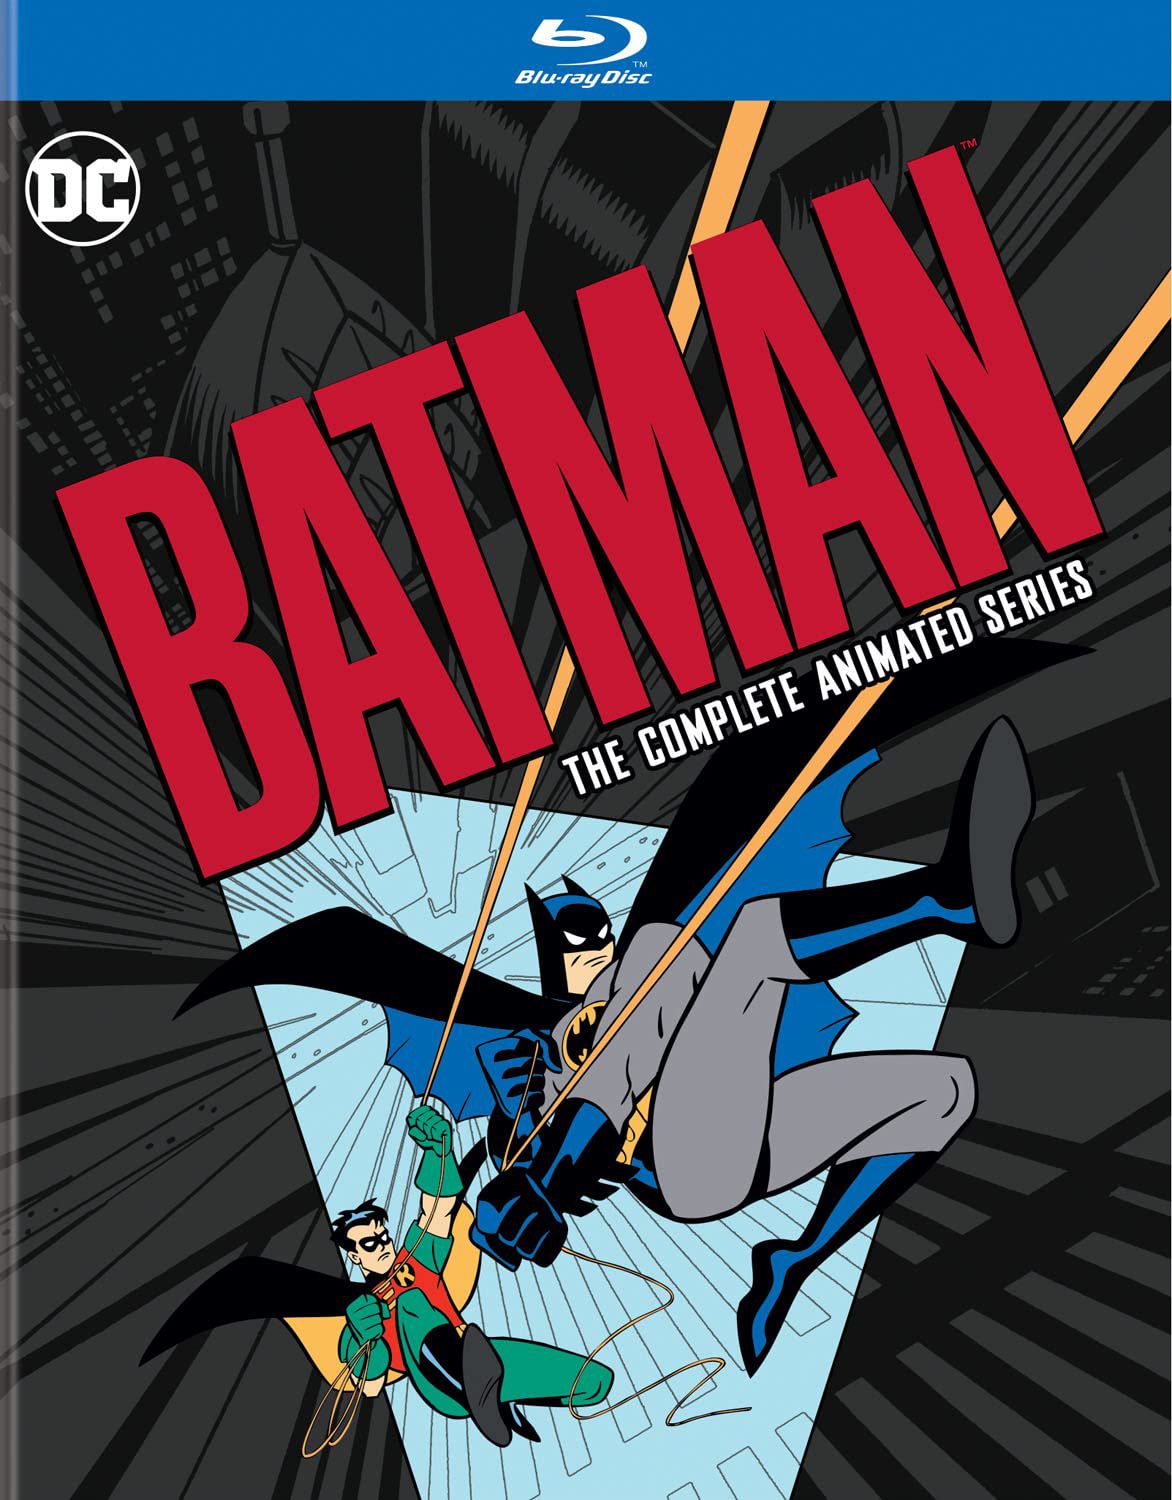 Batman: The Complete Animated Series box cover with Batman and Robin swinging into action